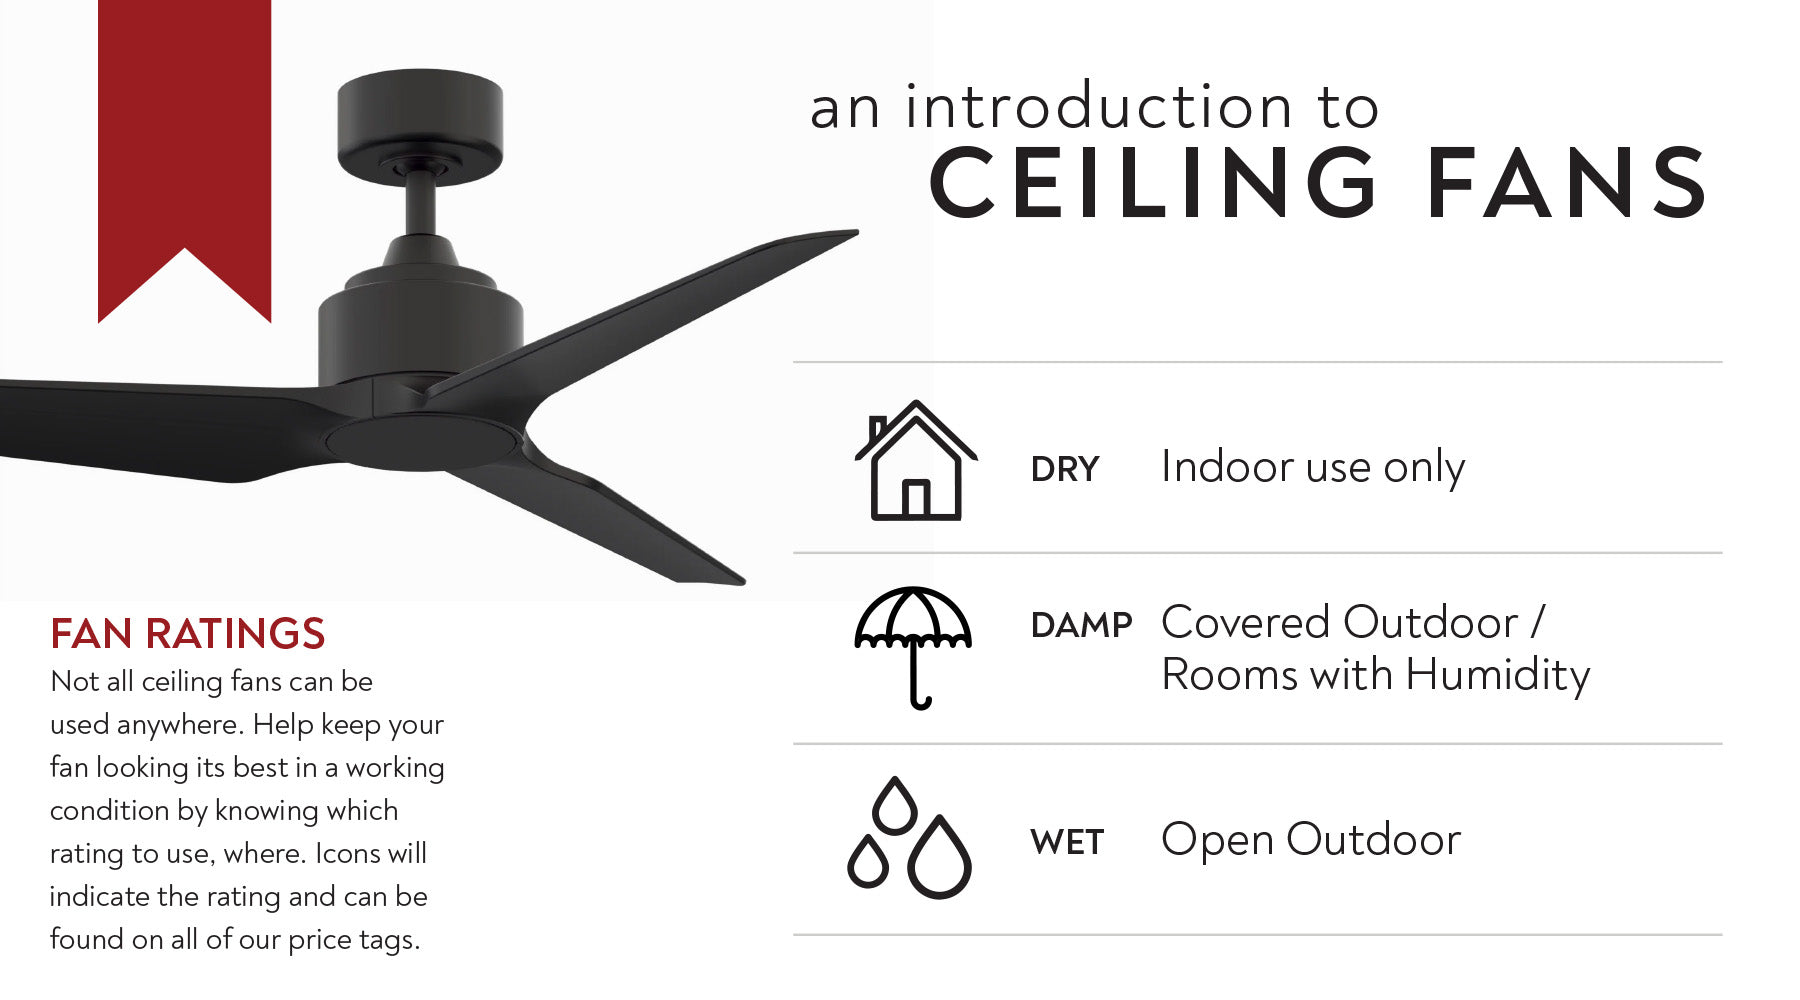 How to size a ceiling fan, ceiling fans 101